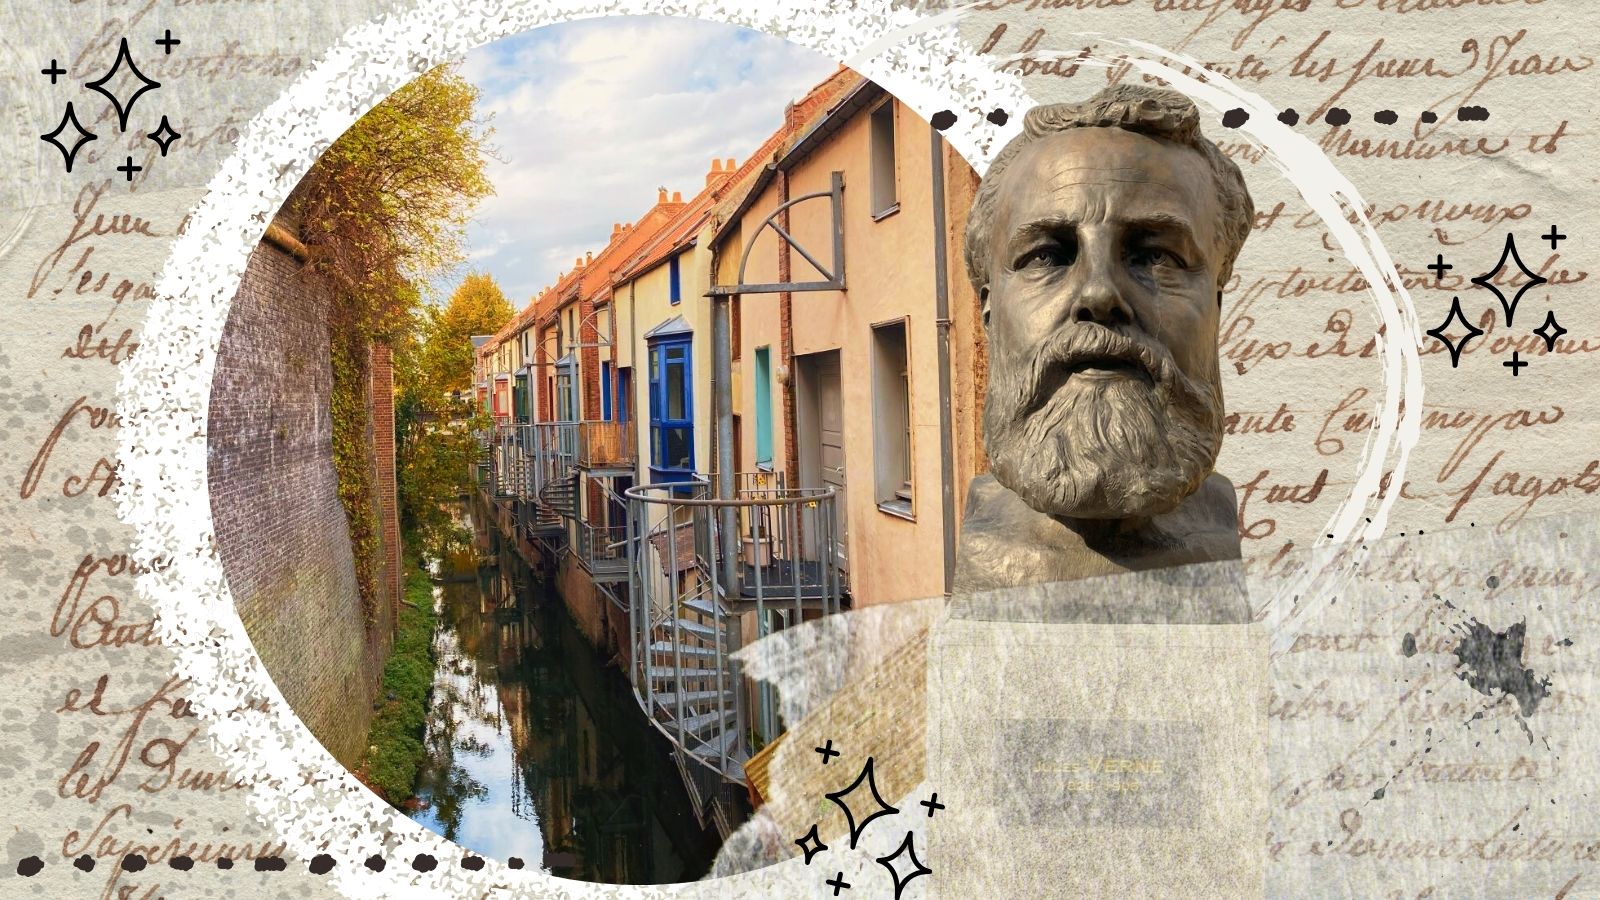 A long weekend in Amiens, France: Jules Verne’s final residence